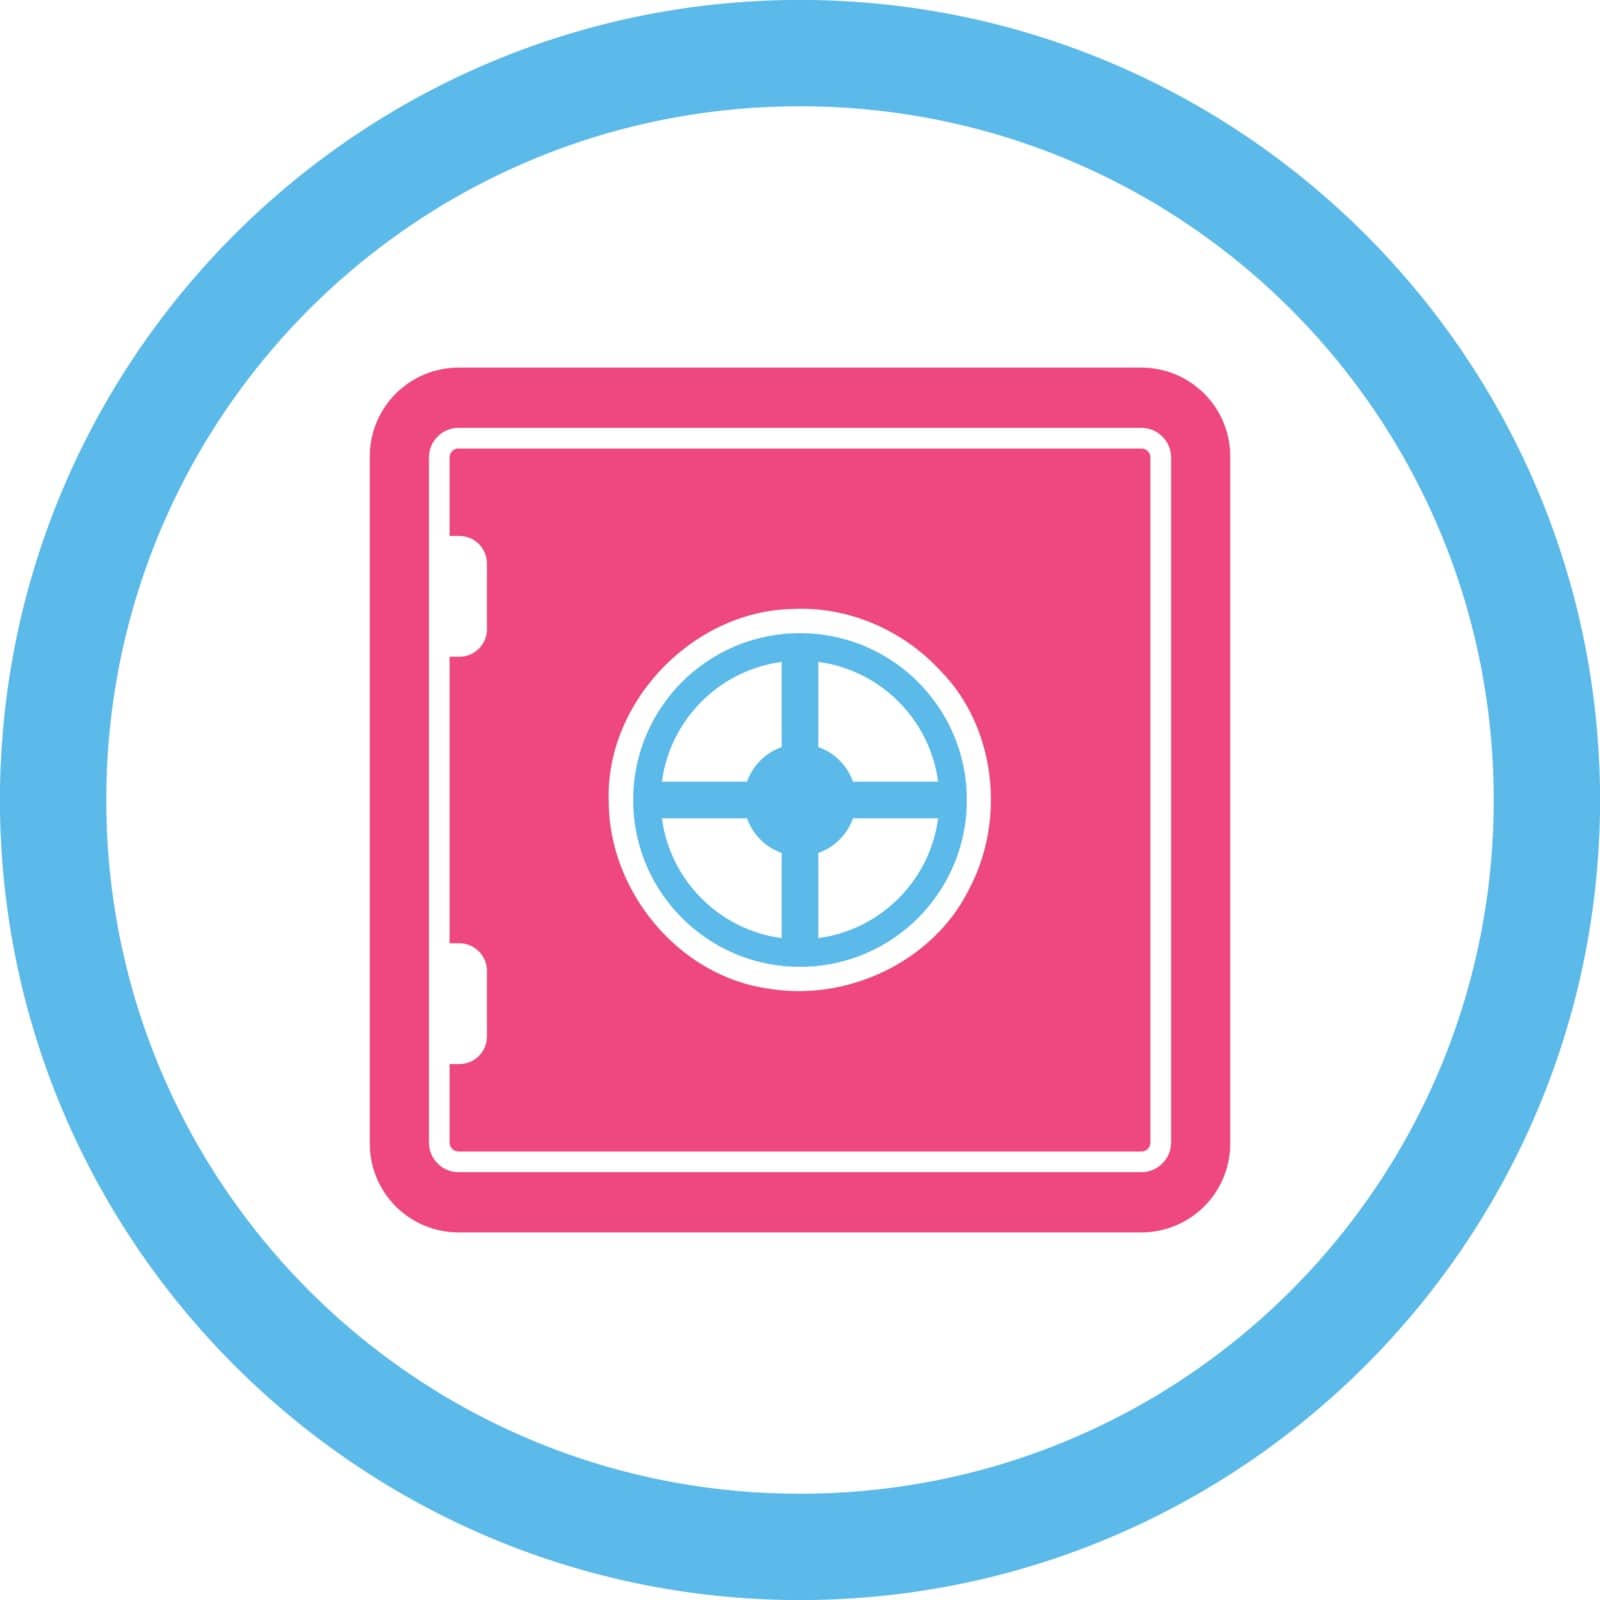 Safe vector icon. This flat rounded symbol uses pink and blue colors and isolated on a white background.